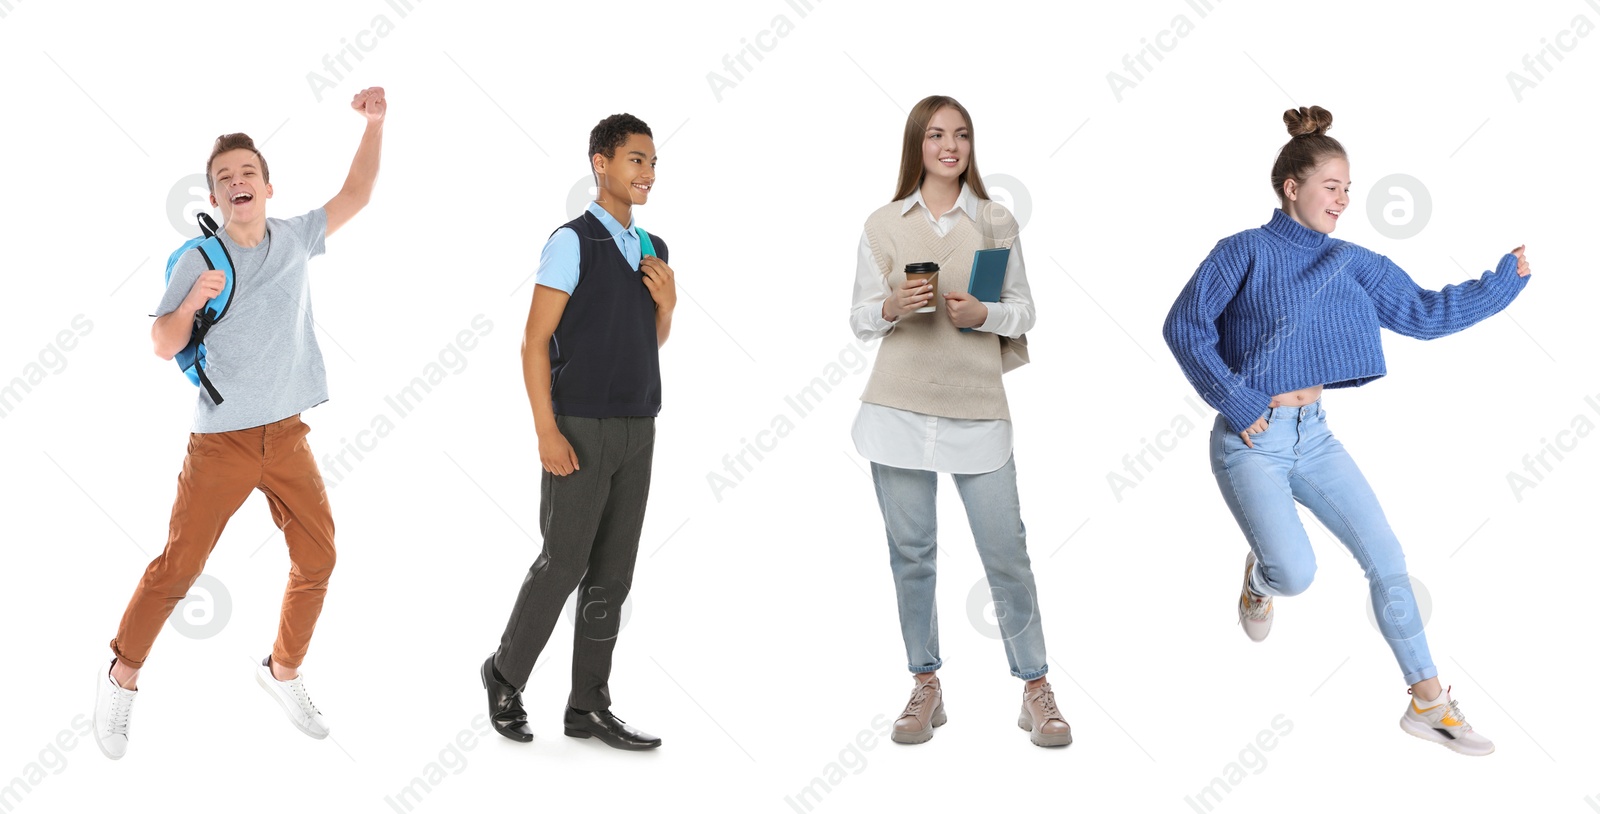 Image of Collage with photos of teenagers on white background